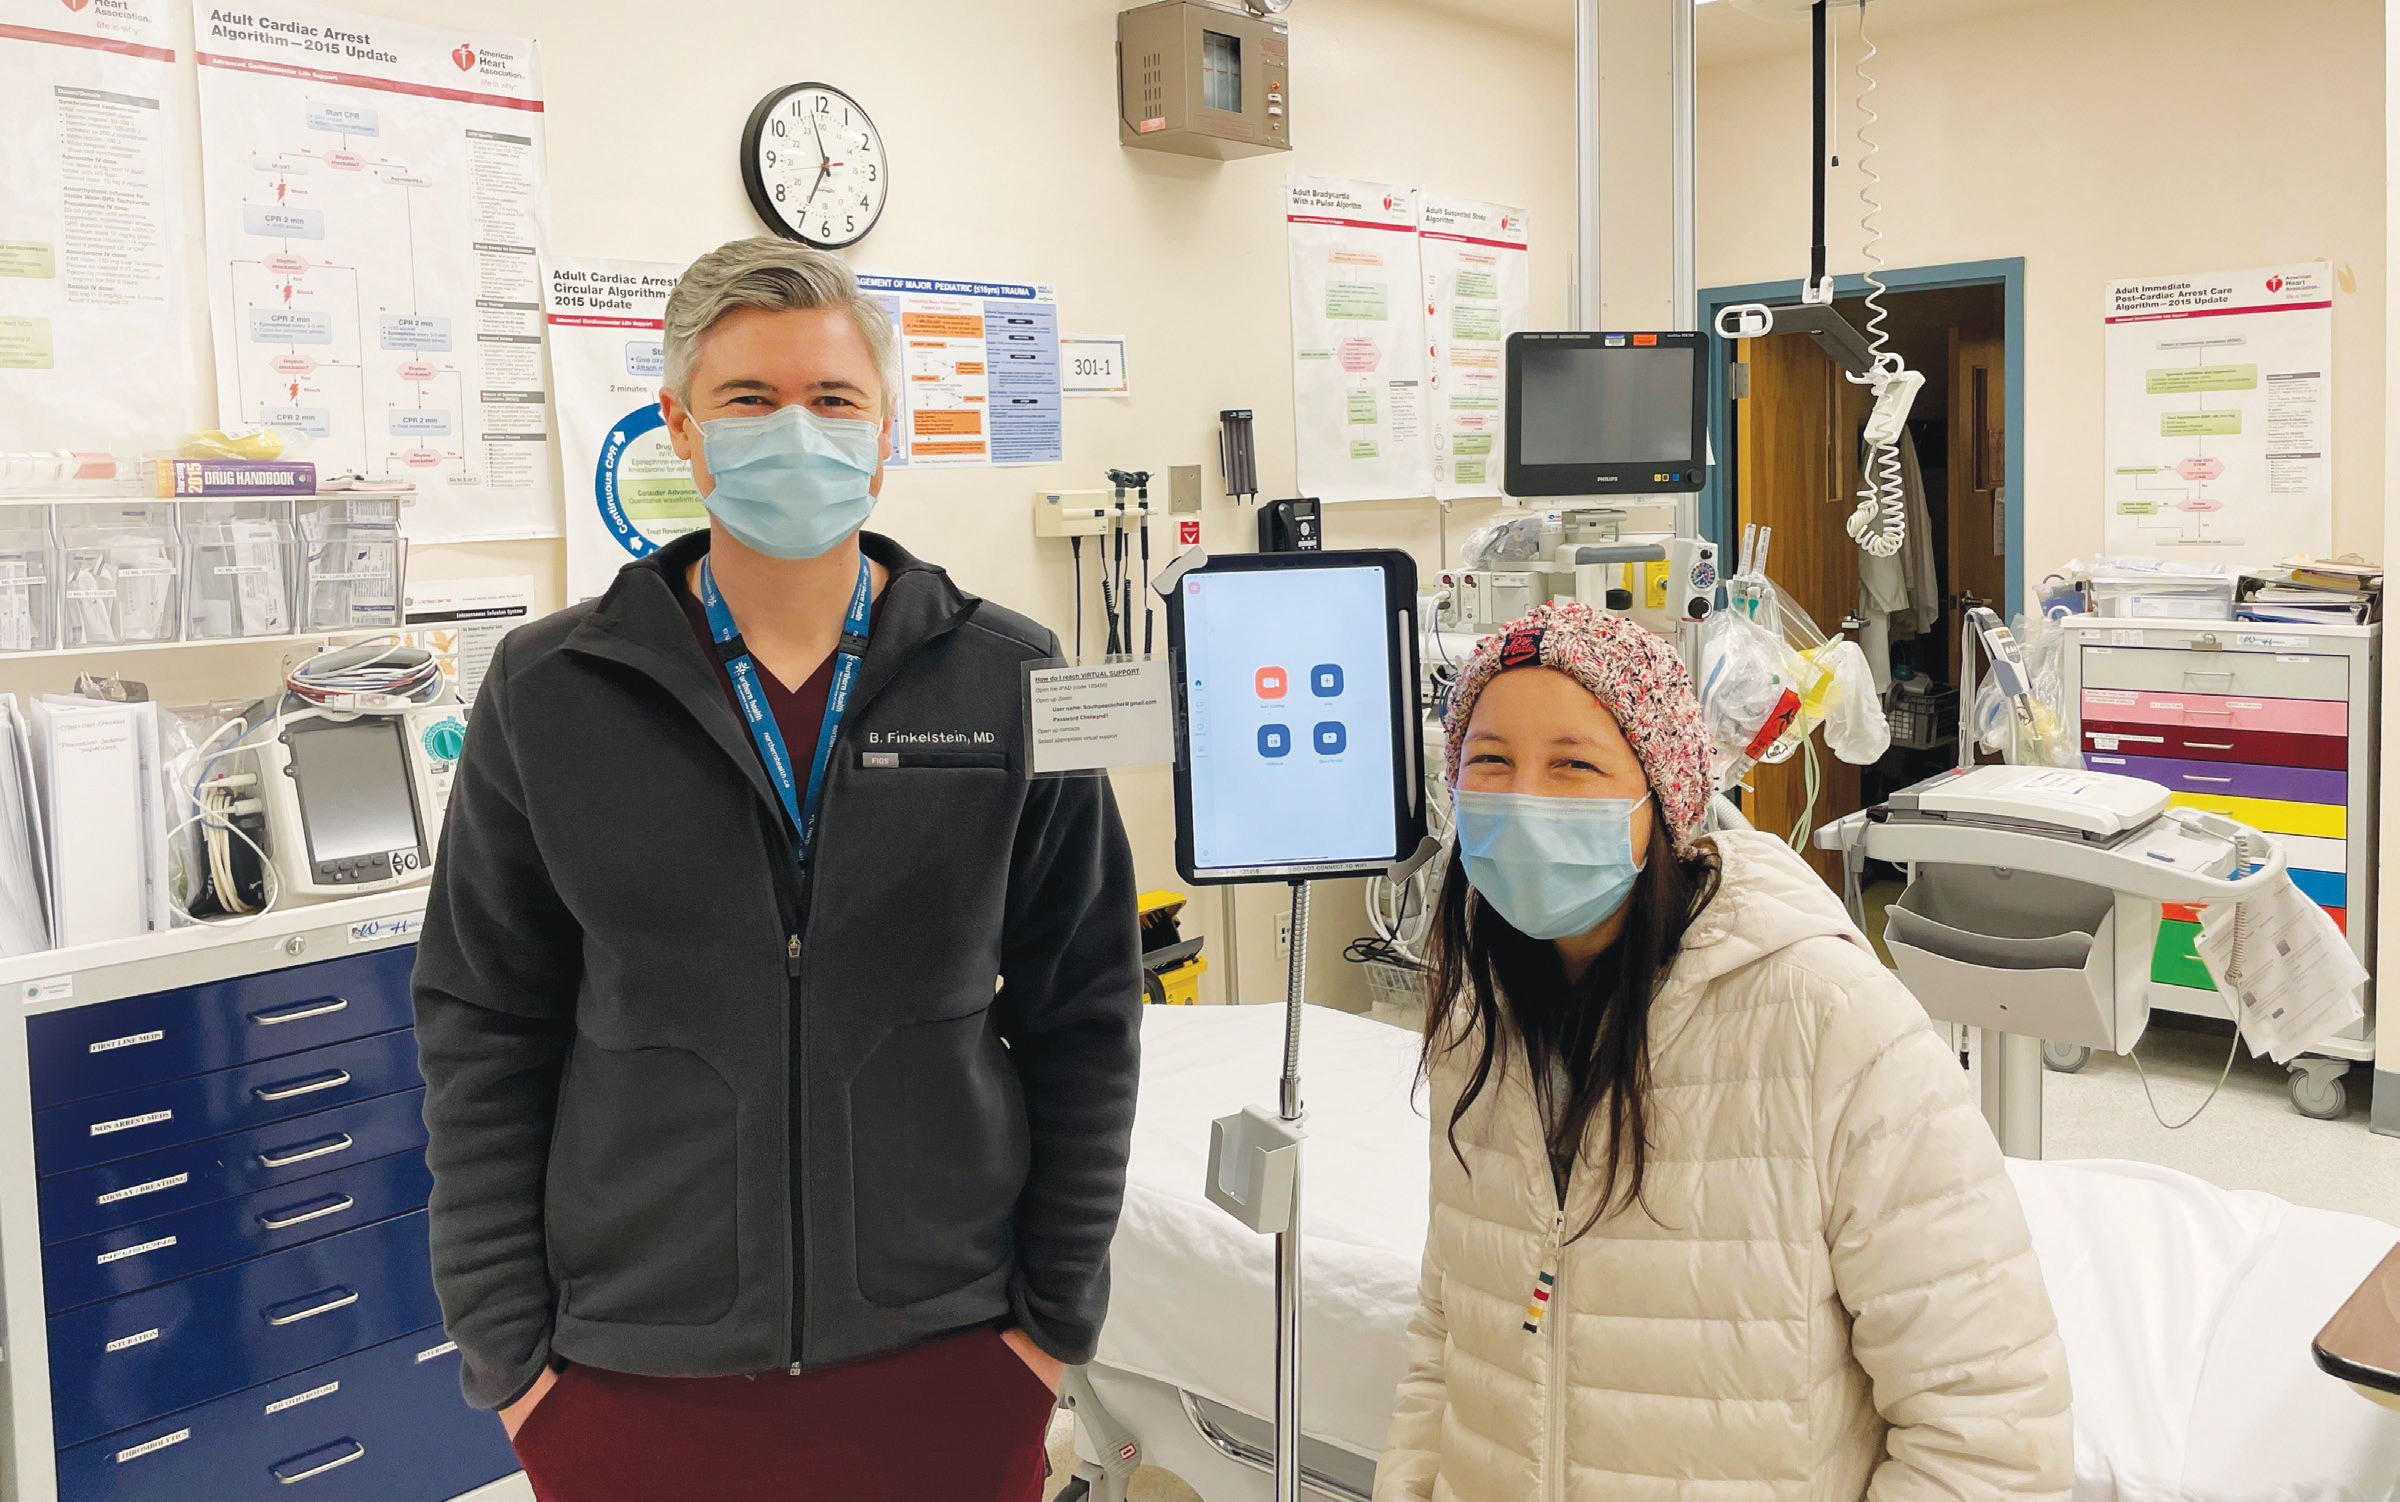 Drs Bron Finkelstein (left) and Jodie Graham (right), from Chetwynd, are frequent users of the Real-Time Virtual Support pathways for providers.